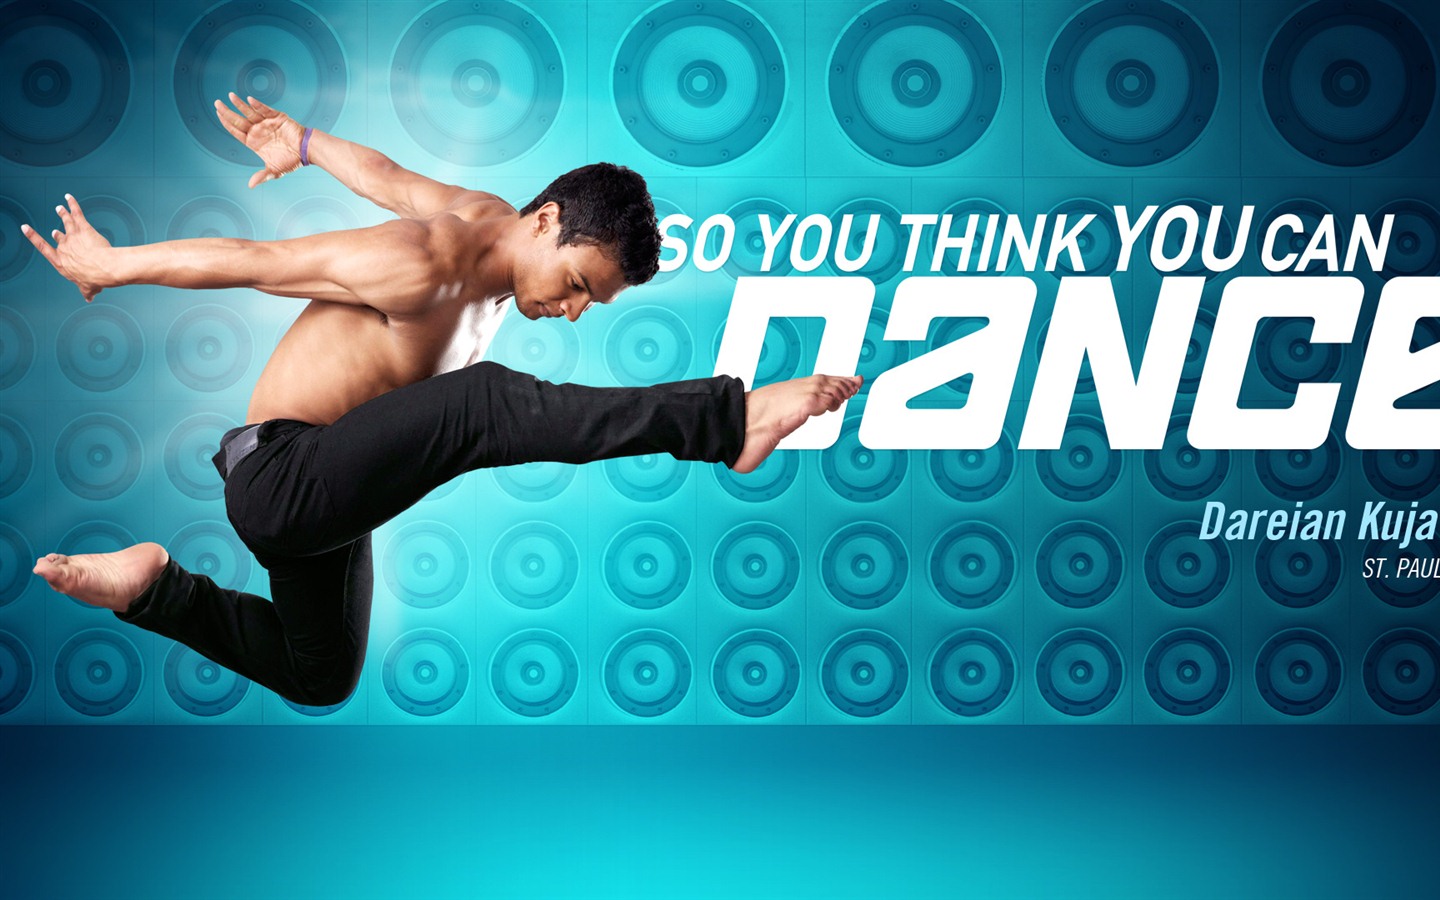 So You Think You Can Dance 舞林争霸 2012高清壁纸11 - 1440x900